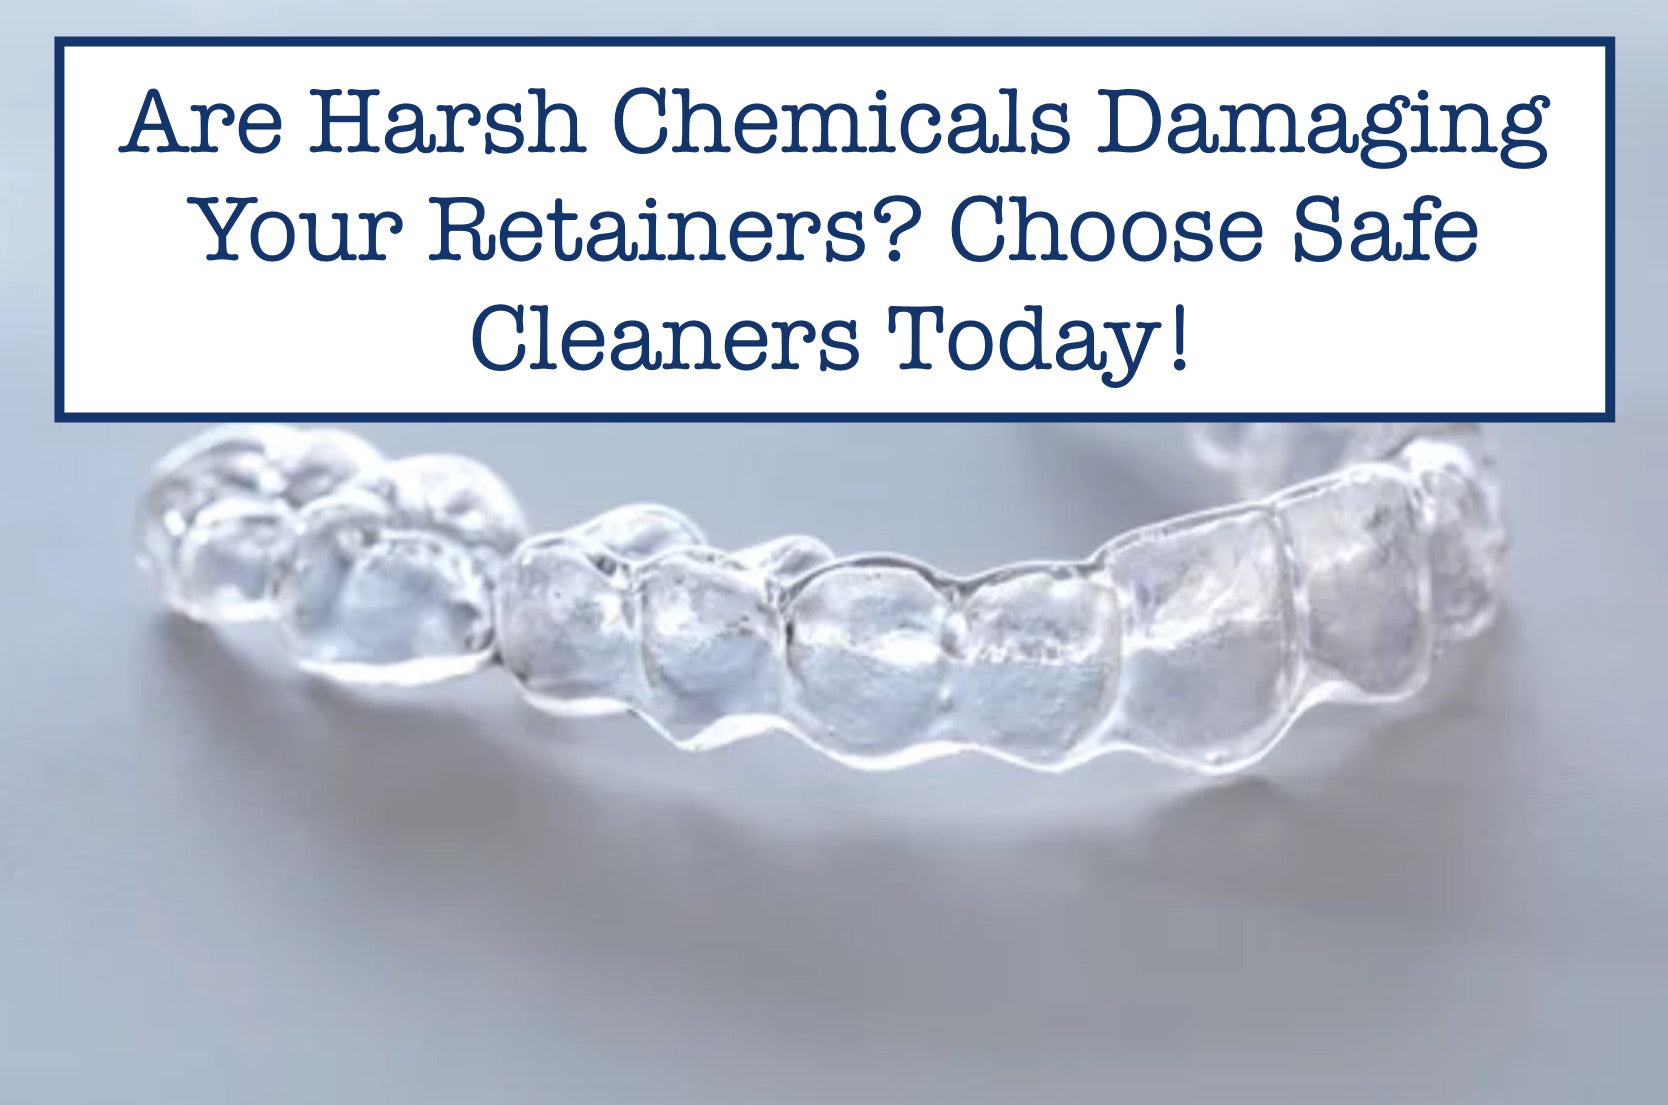 Are Harsh Chemicals Damaging Your Retainers? Choose Safe Cleaners Today!